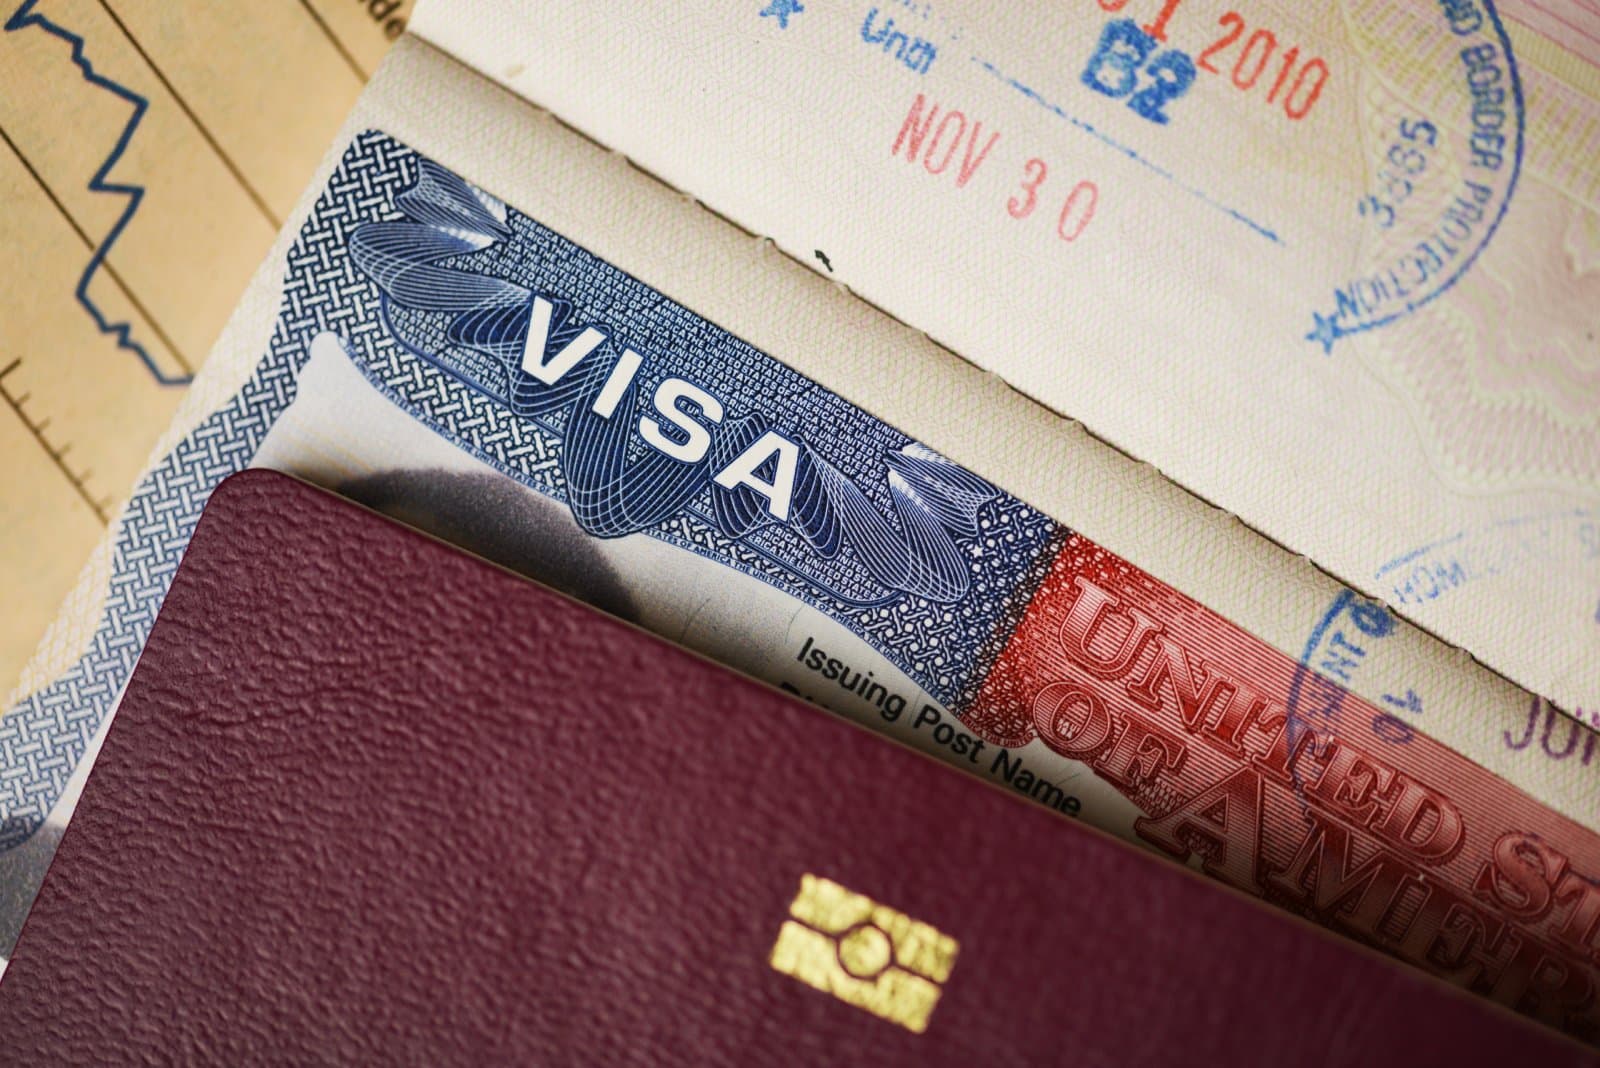 Image Credit: Shutterstock / Eviart <p><span>The Biden administration proposed changes to the H-1B visa program to increase protection for American and foreign workers, affecting skilled immigration significantly.</span></p>